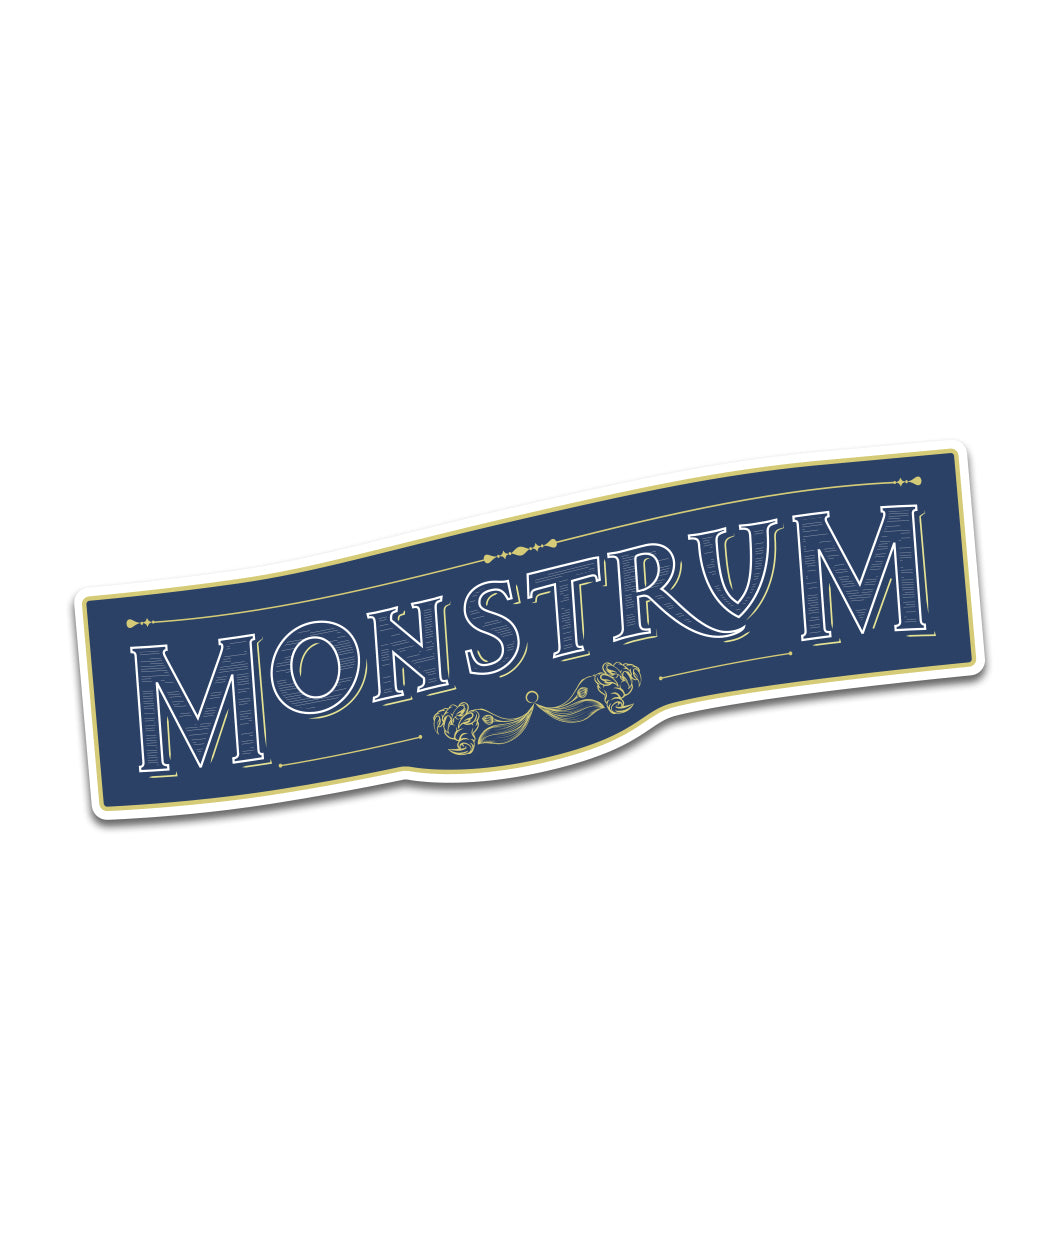 Blue rectangle that is curved upwards with a white and gold outline. “Monstrum” is in blue font with a white outline. Two gold stylized lines are above and below with a gold floral design below - from Monstrum